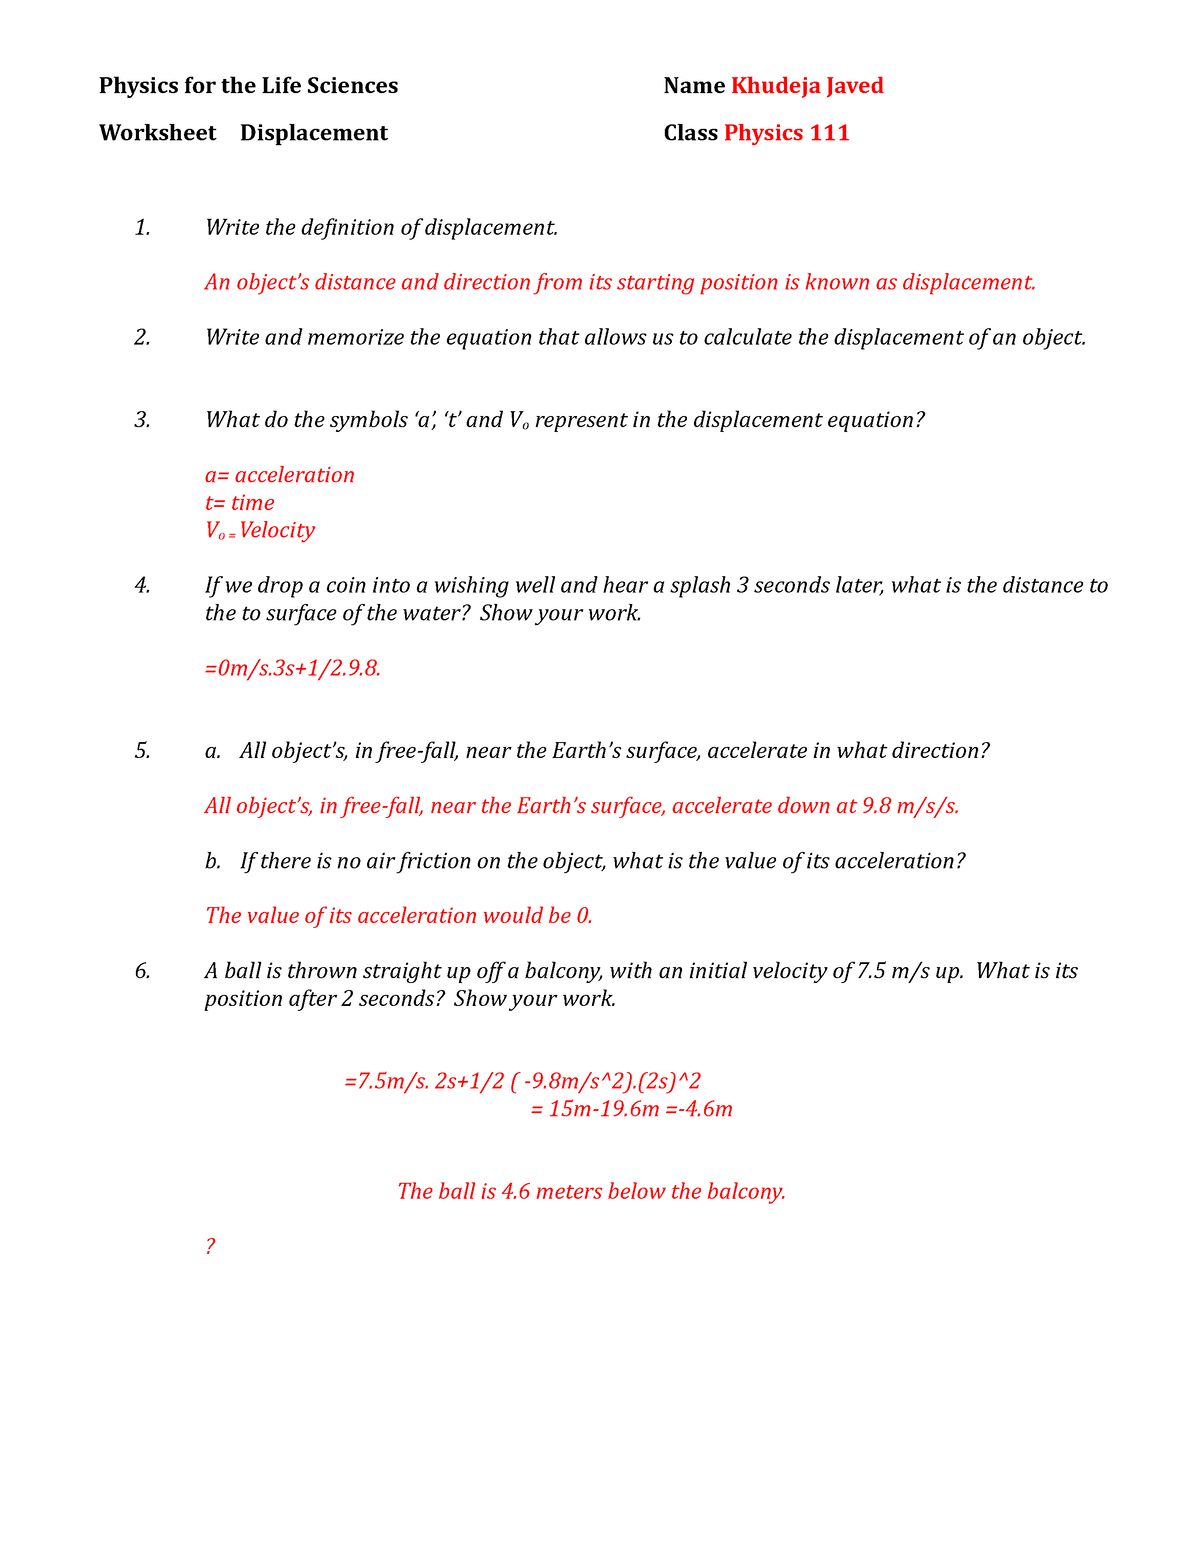 Worksheet displacement - Physics for the Life Sciences Name Khudeja ...